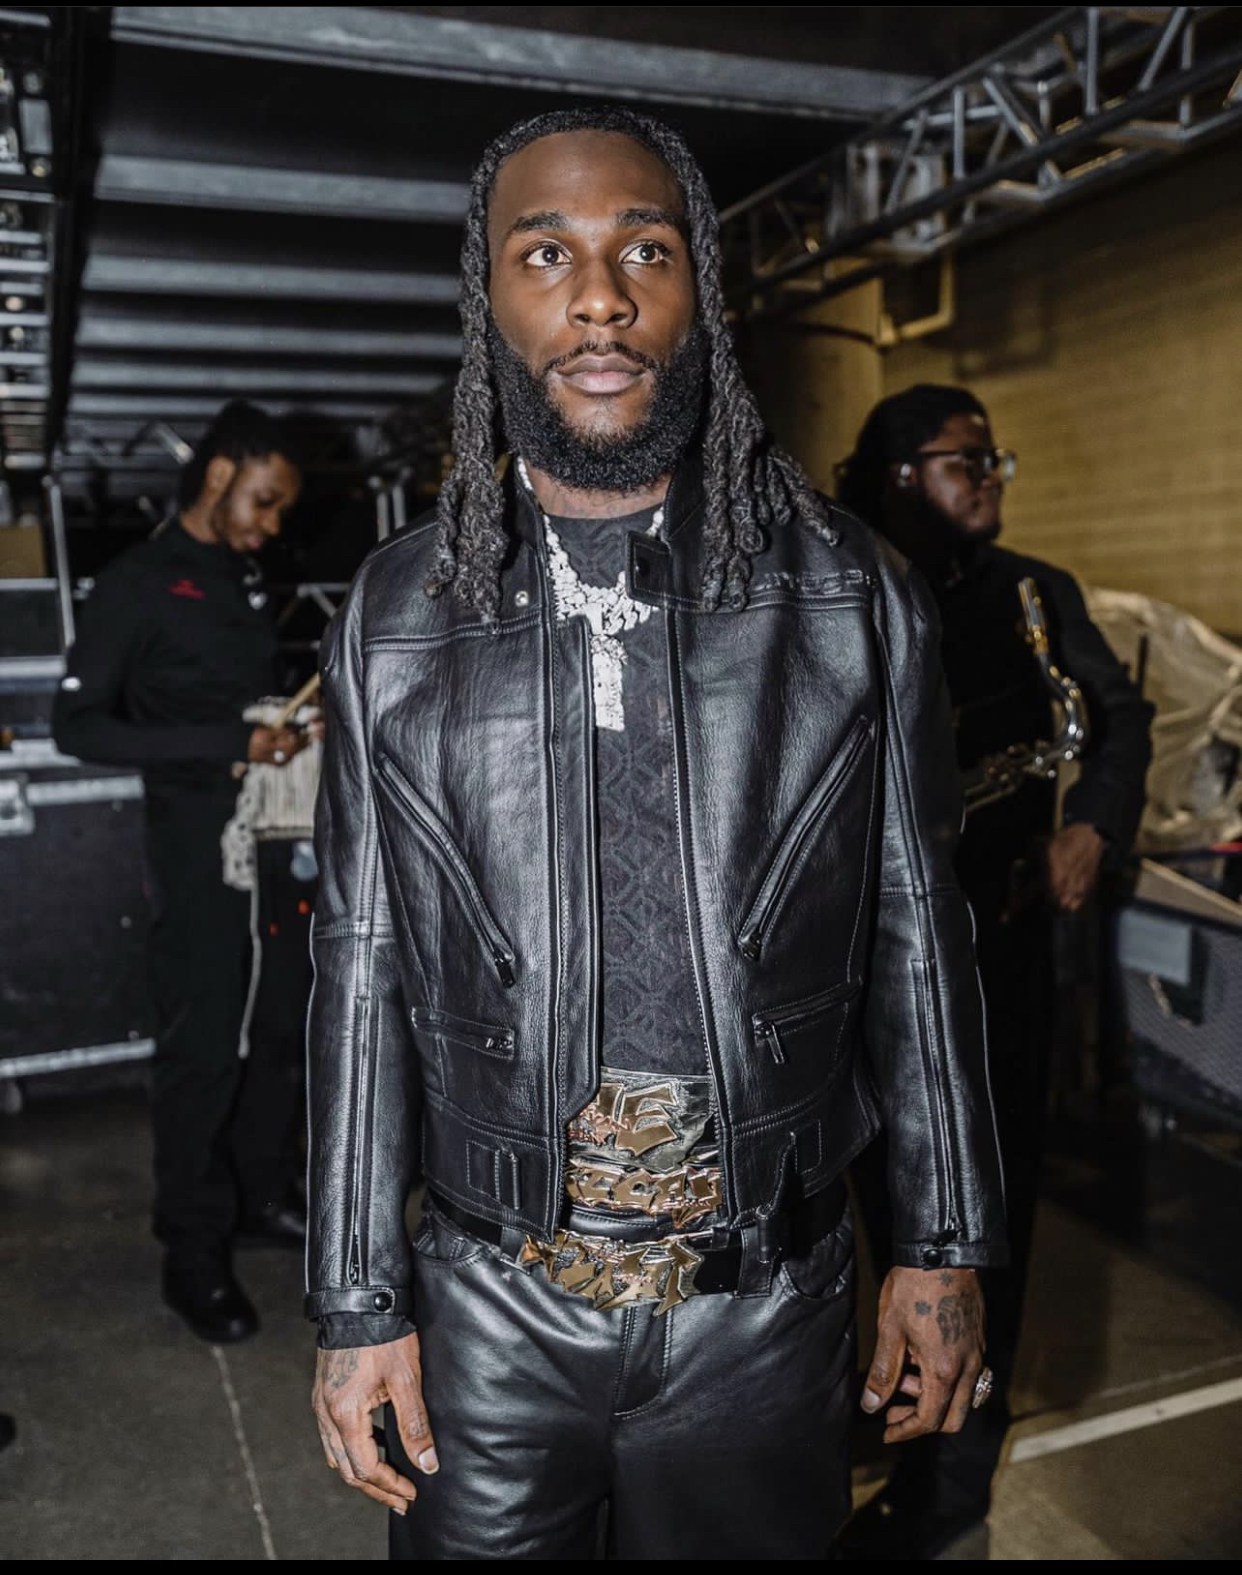 Burna Boy Explains Why He’s Not Involved In Nigeria’s Election